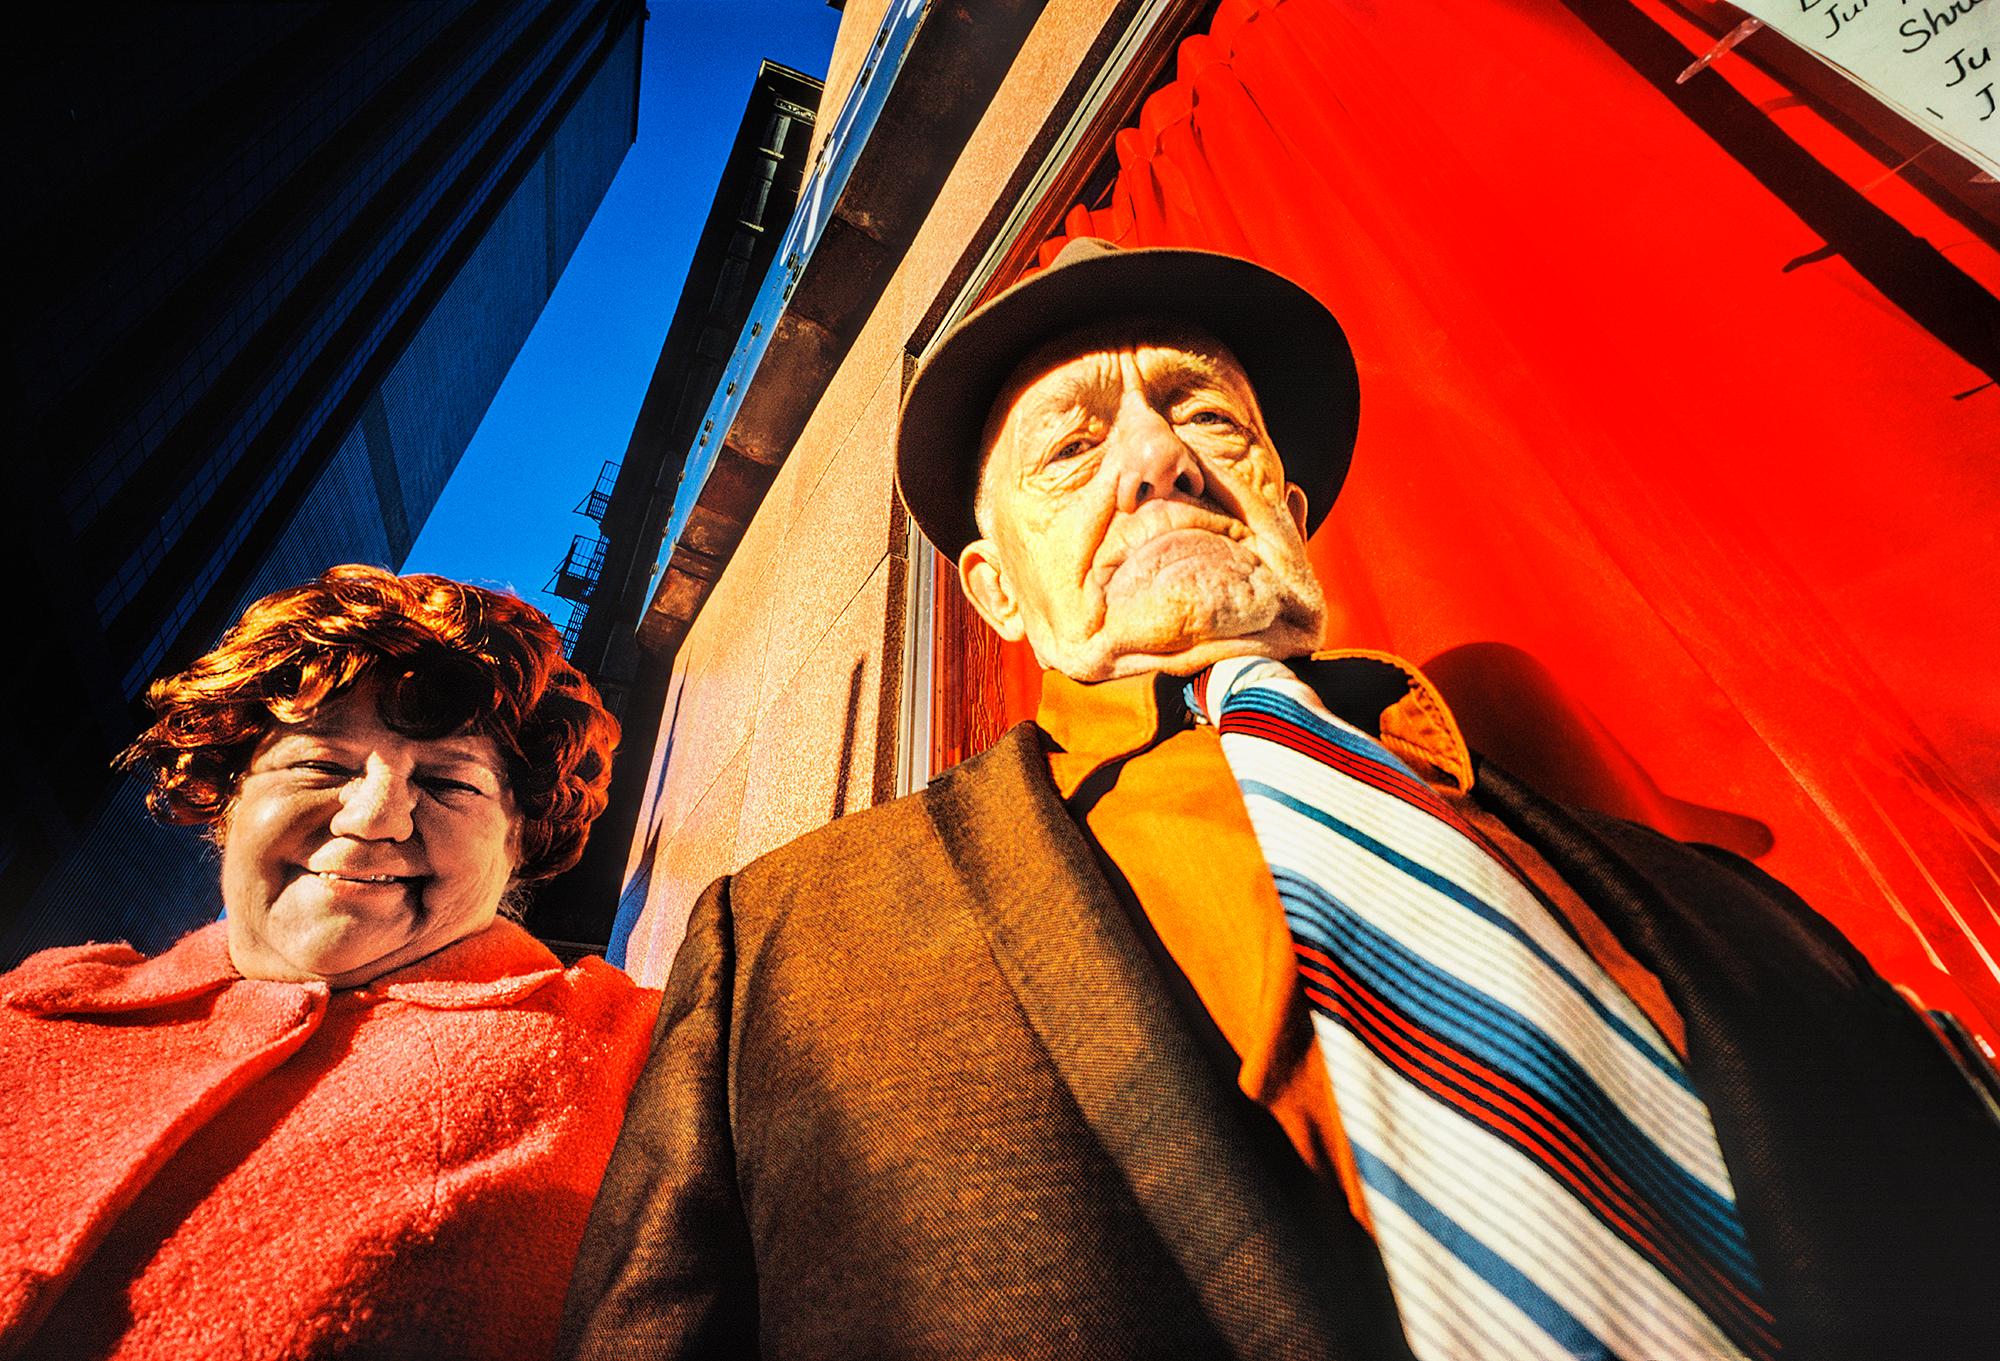 Elderly Husband and Wife Group Street Portrait Against a Manhattan Red Wall